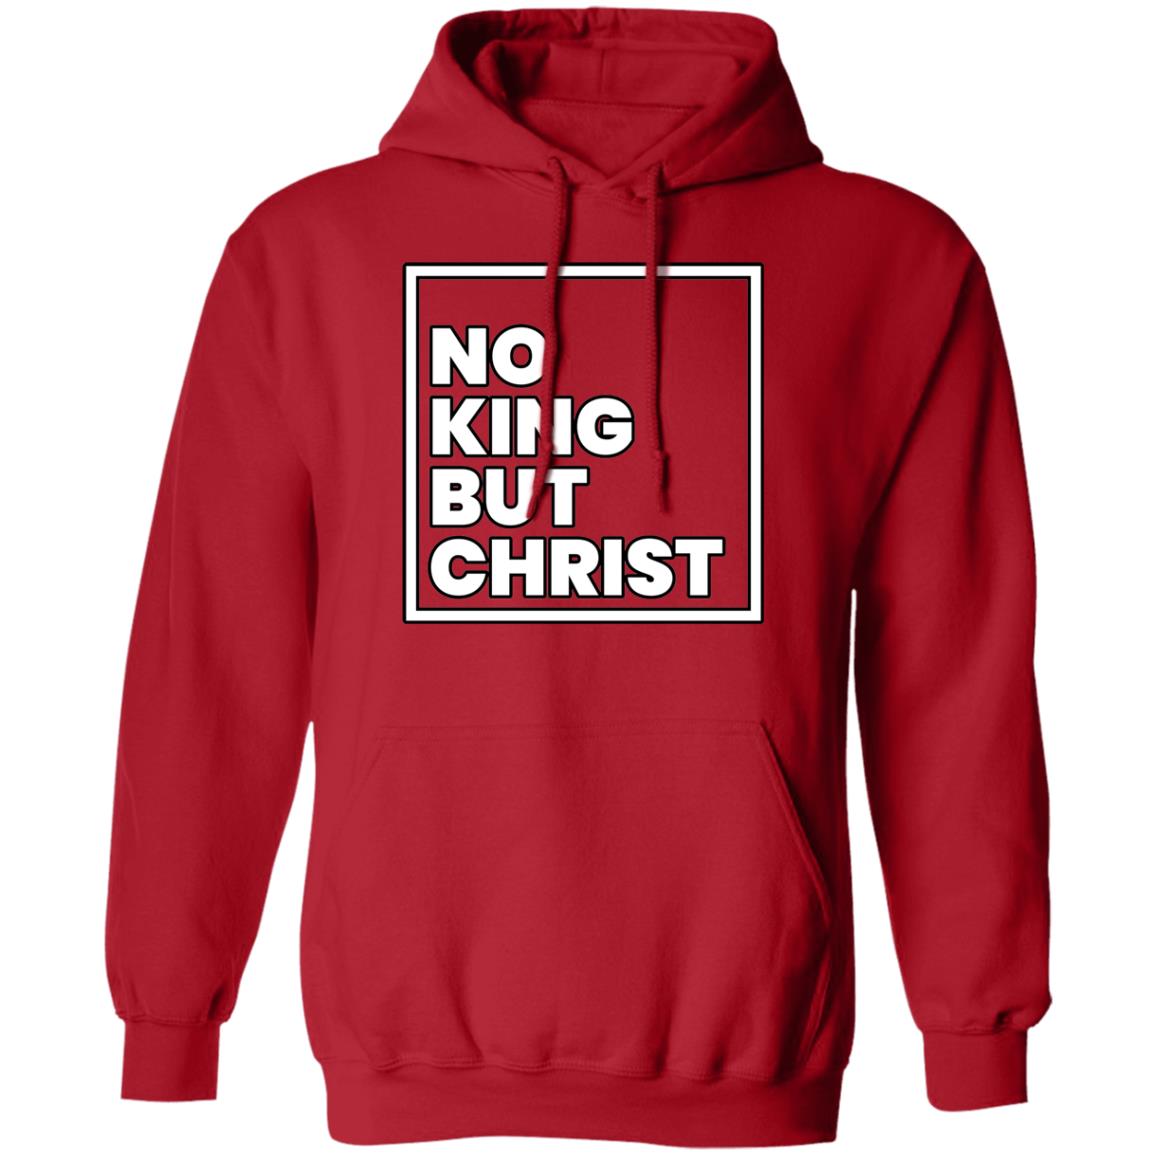 No King But Christ (Unisex Hoodie)